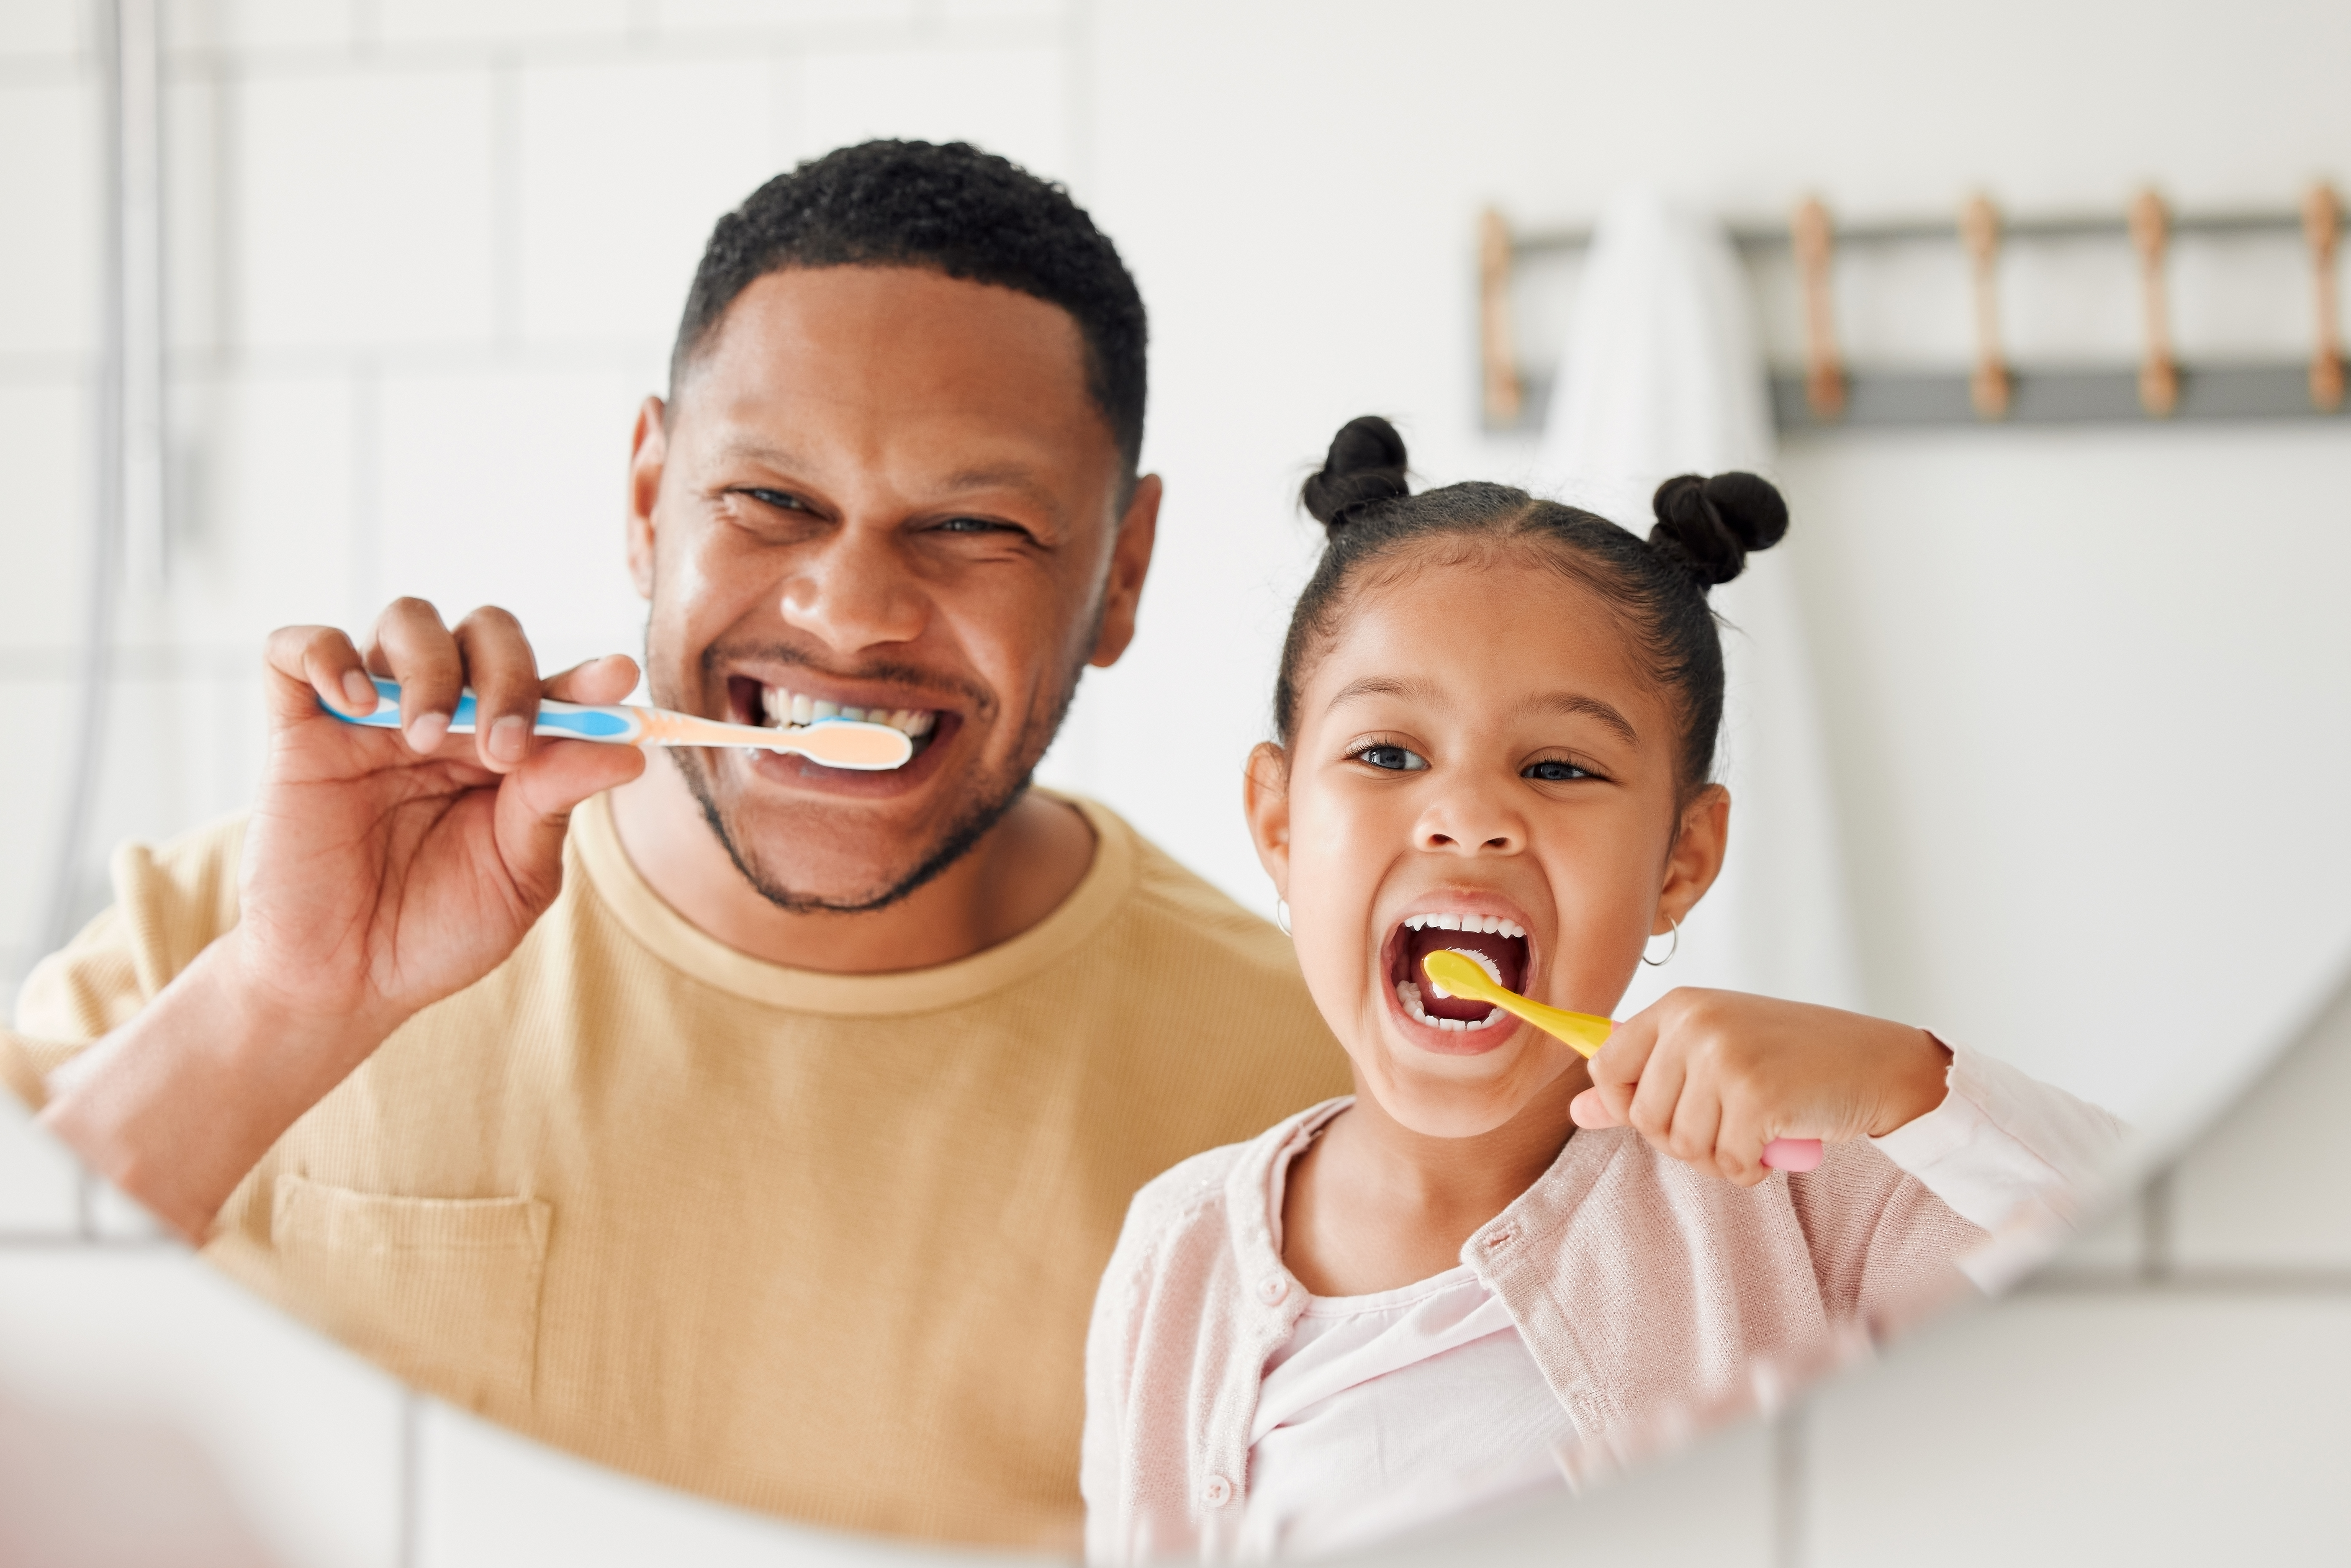 A man and child brushing their teeth in the mirror